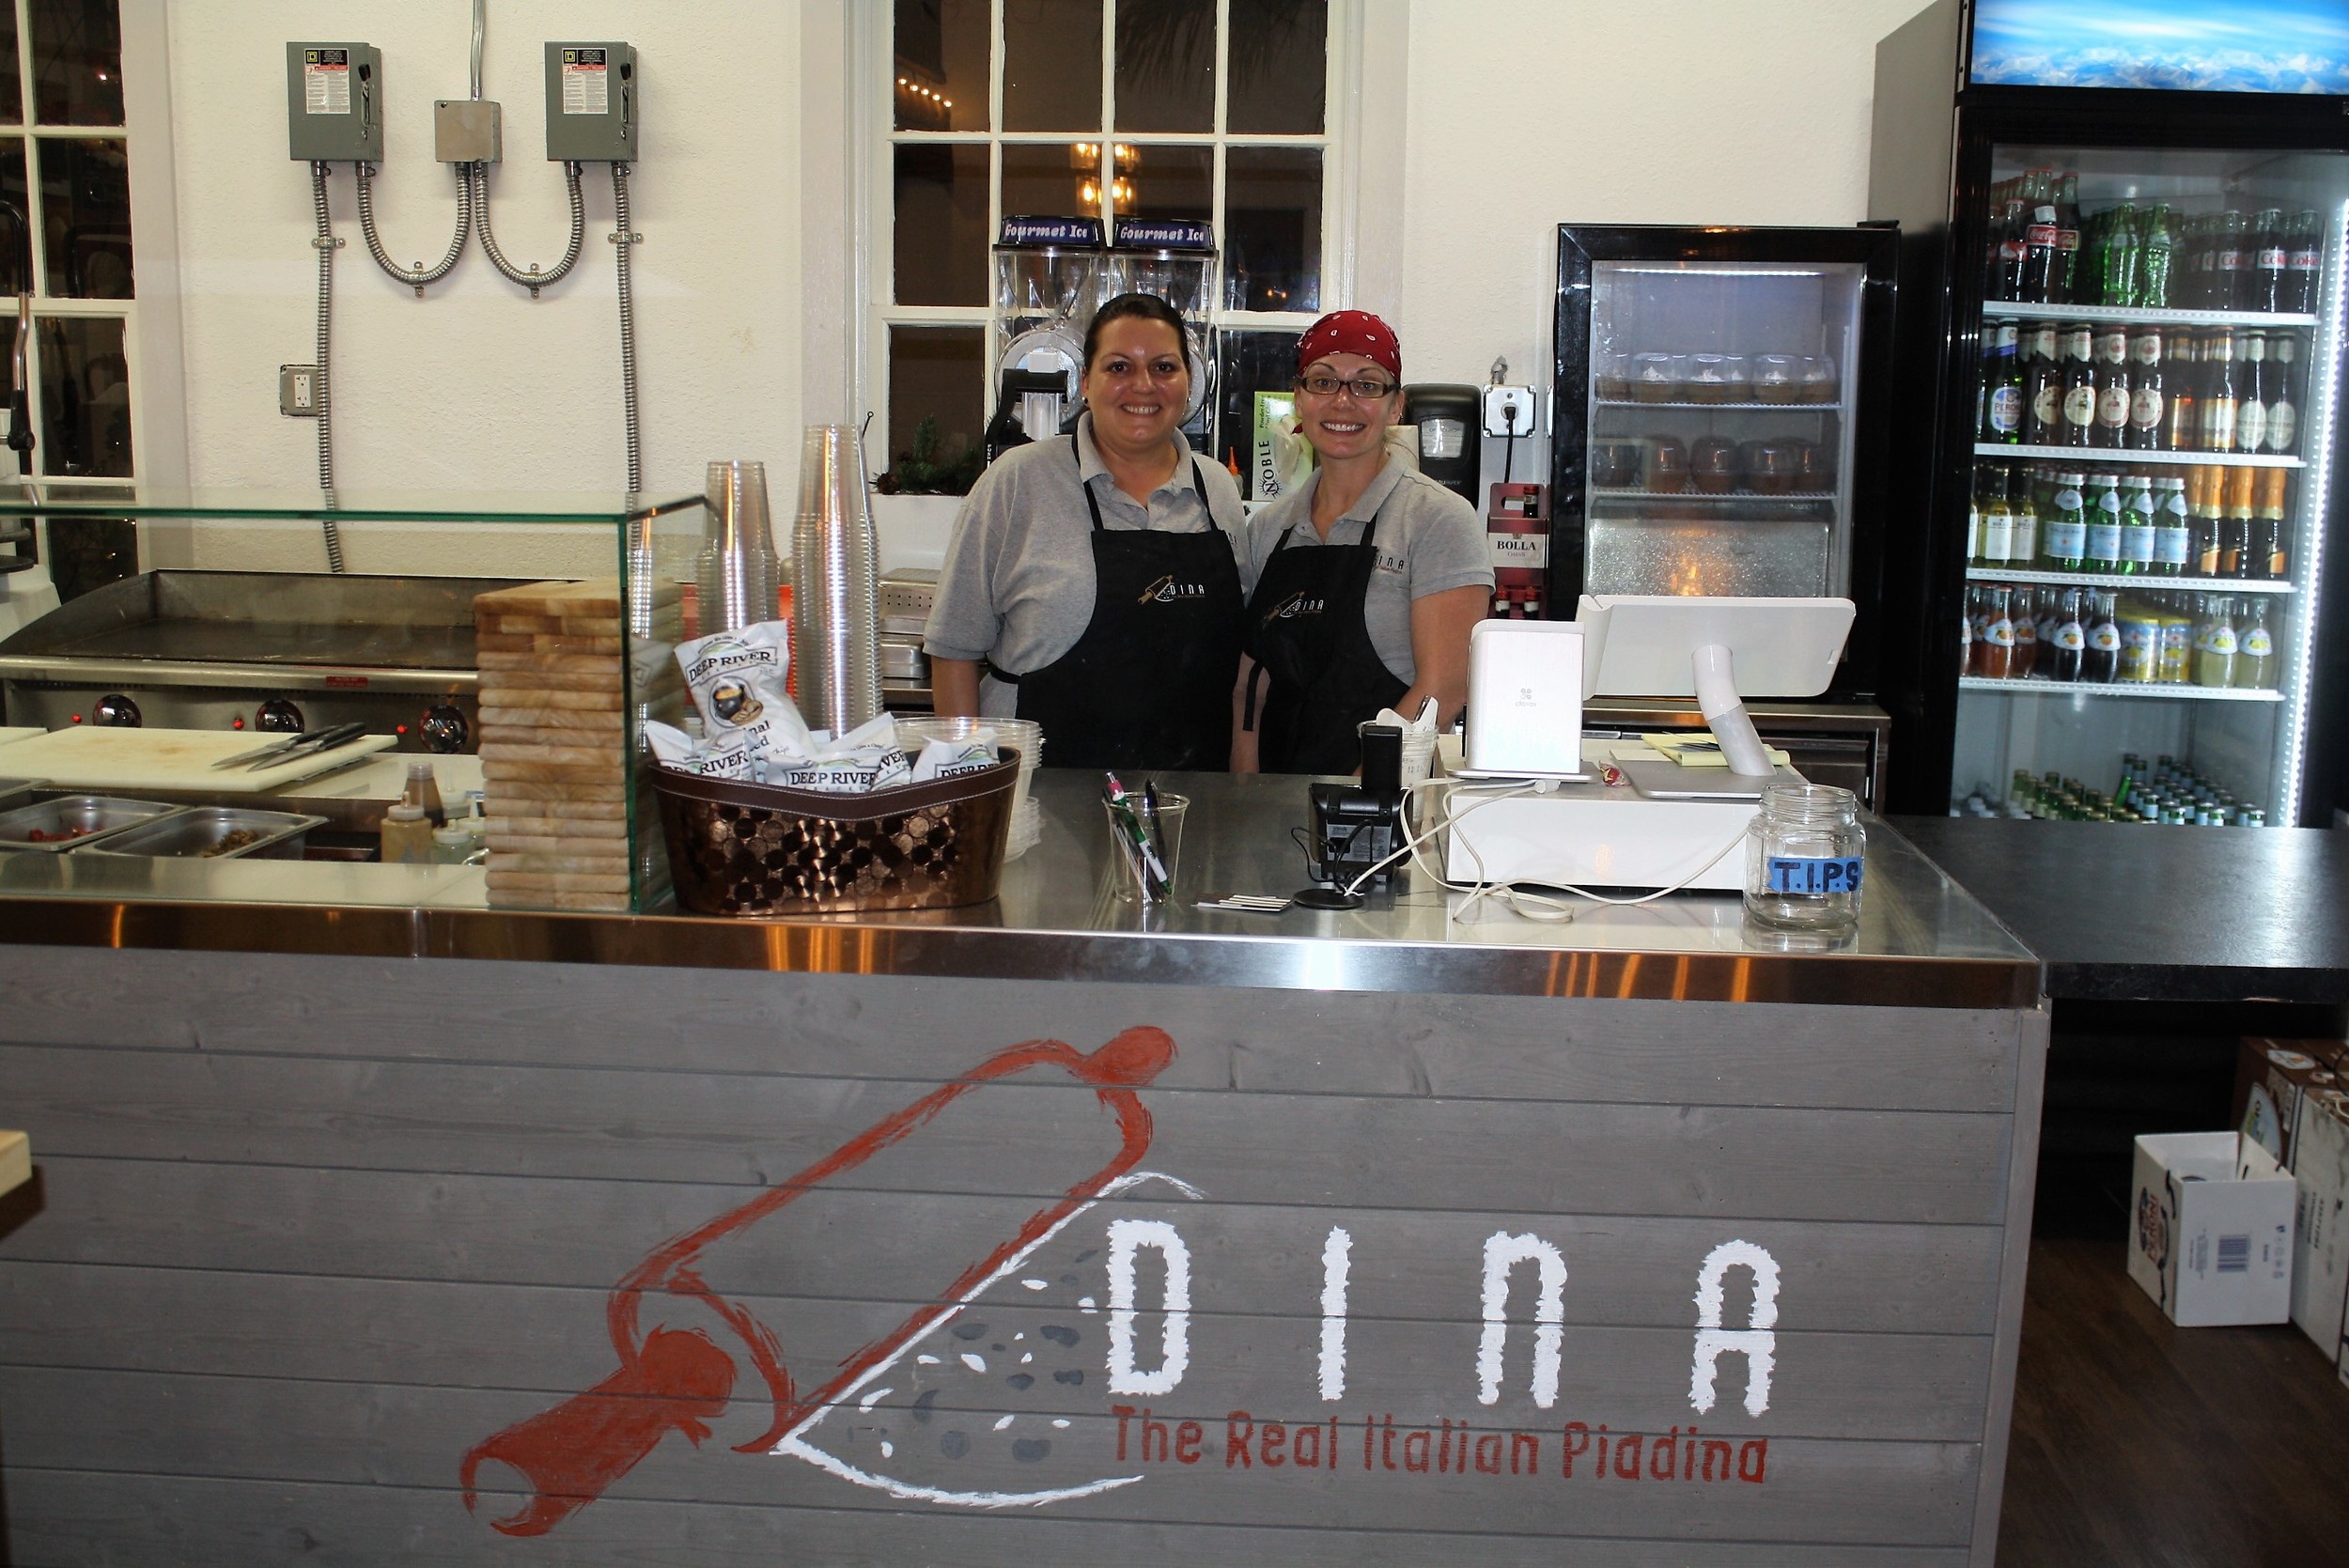 Agnes Blanarik and Rebekah Scroggins of Dina – the Real Piadina, which will hold a grand opening celebration Dec. 10 at the new location in St. Augustine.